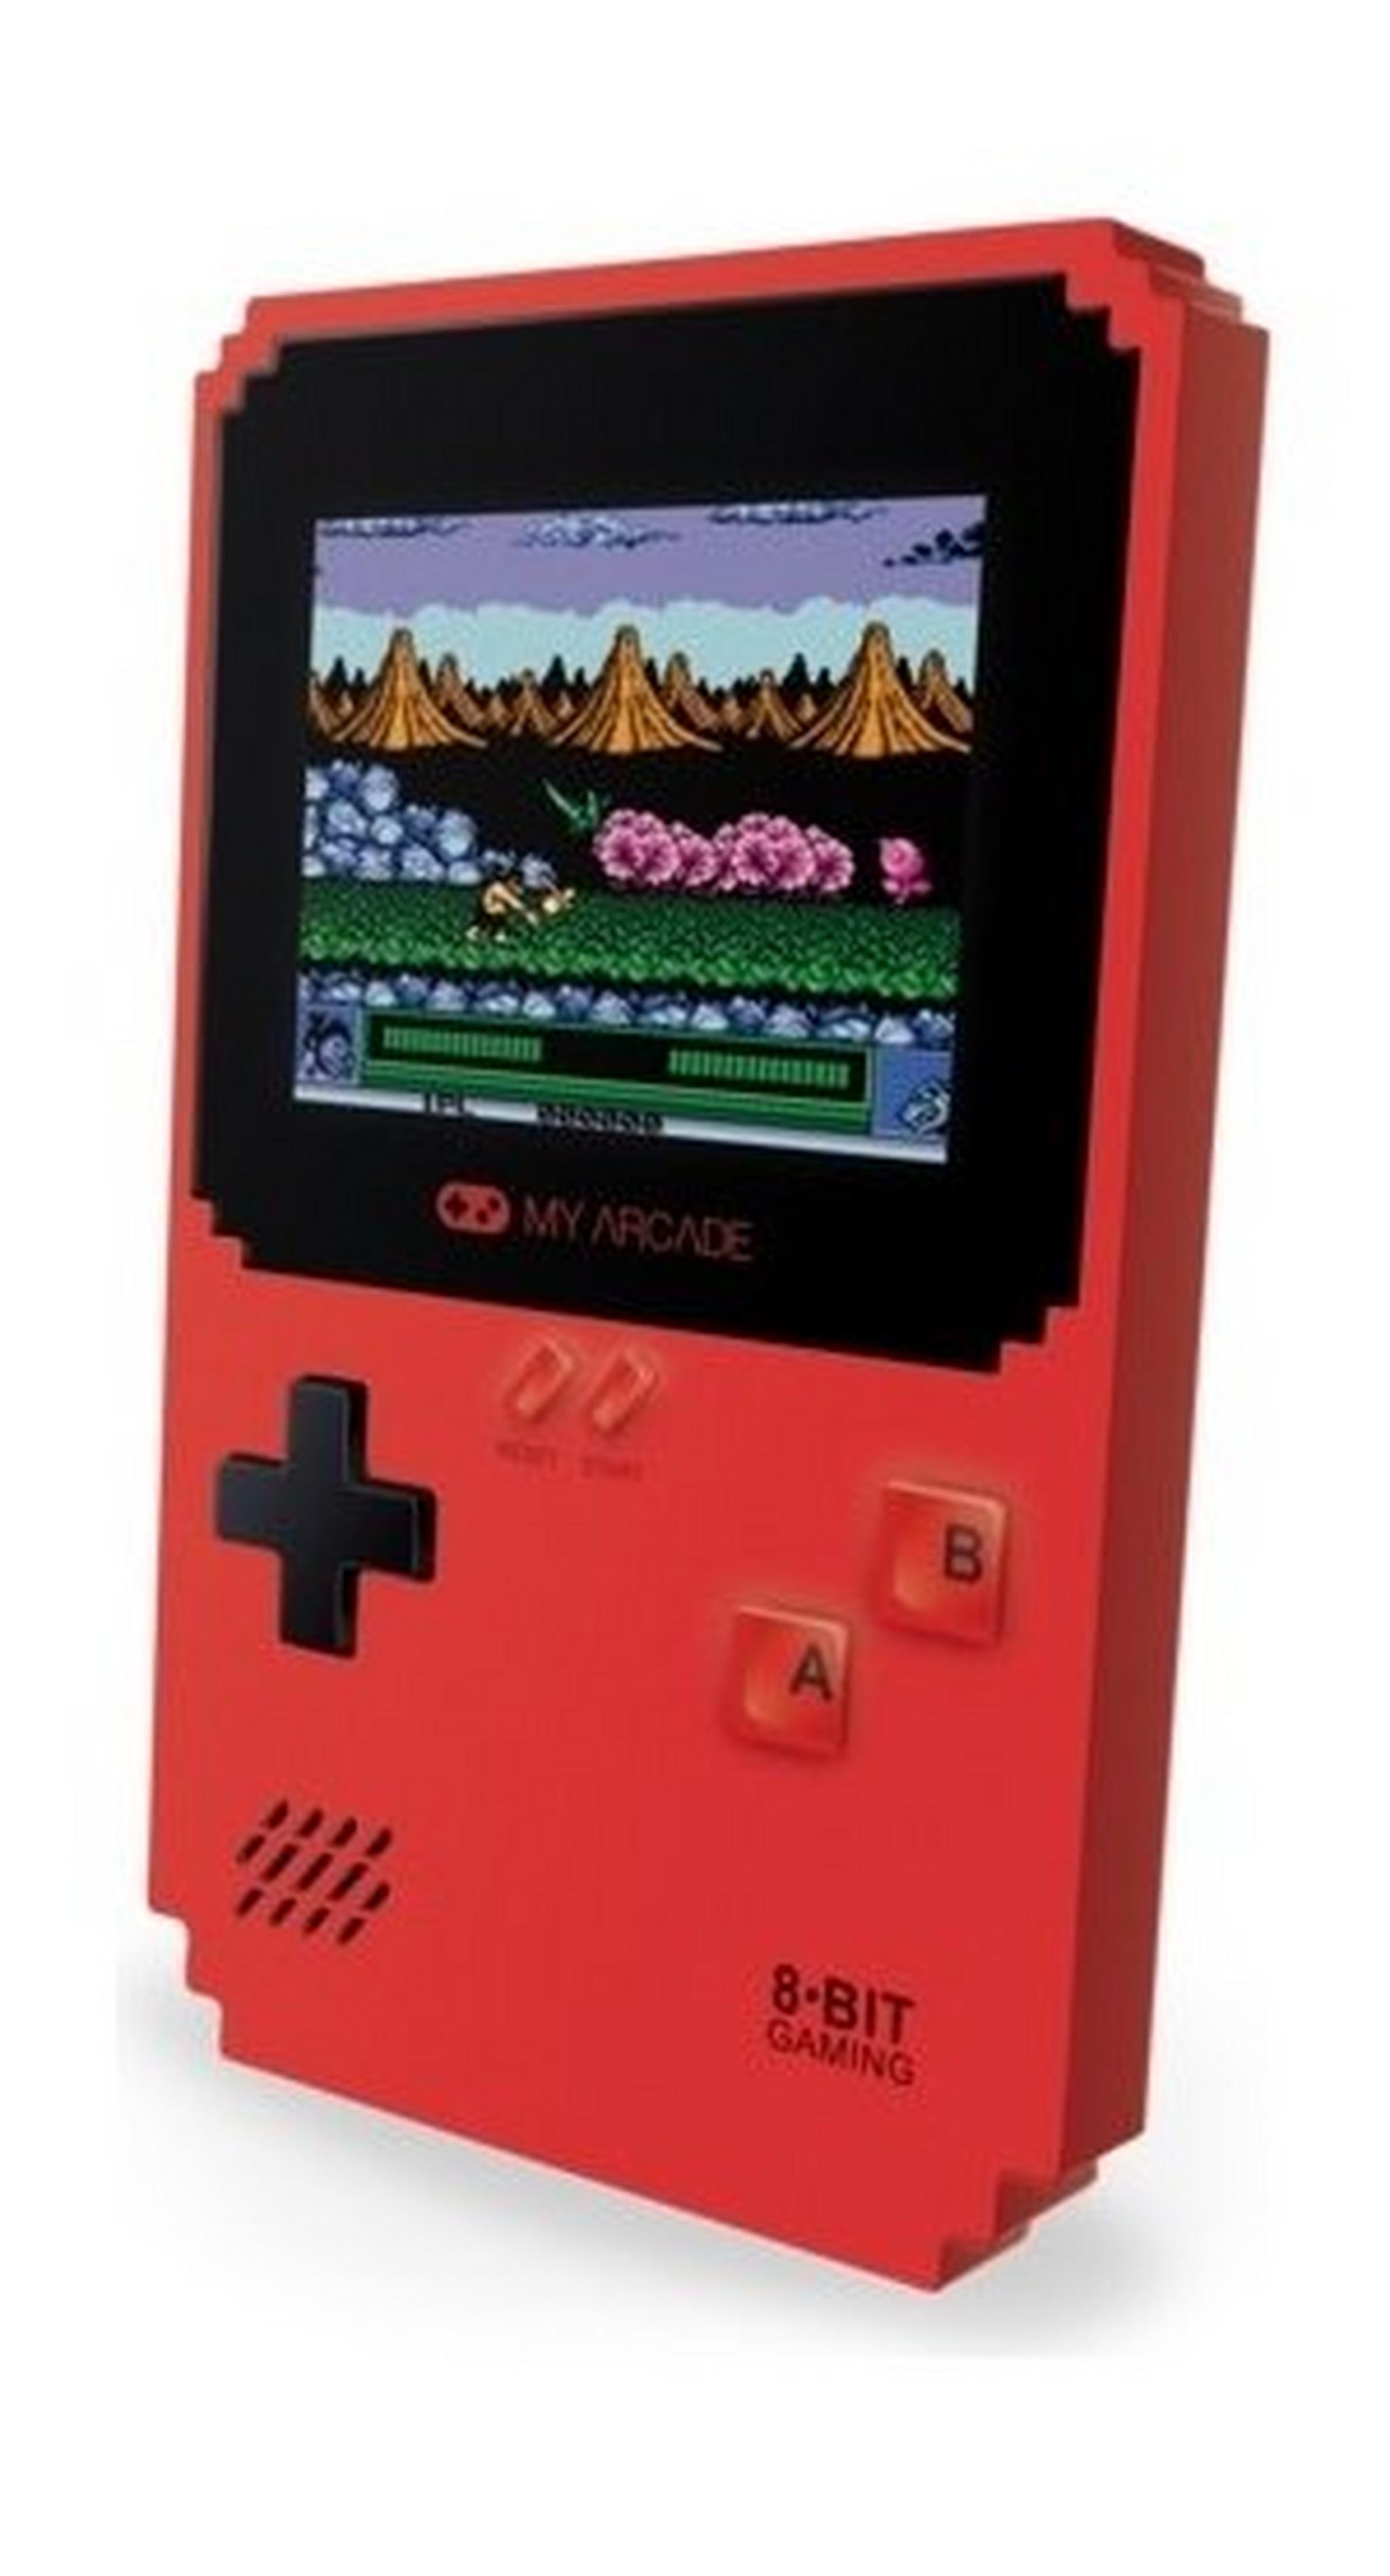 My Arcade Pixel Classic Handheld Gaming System - Red